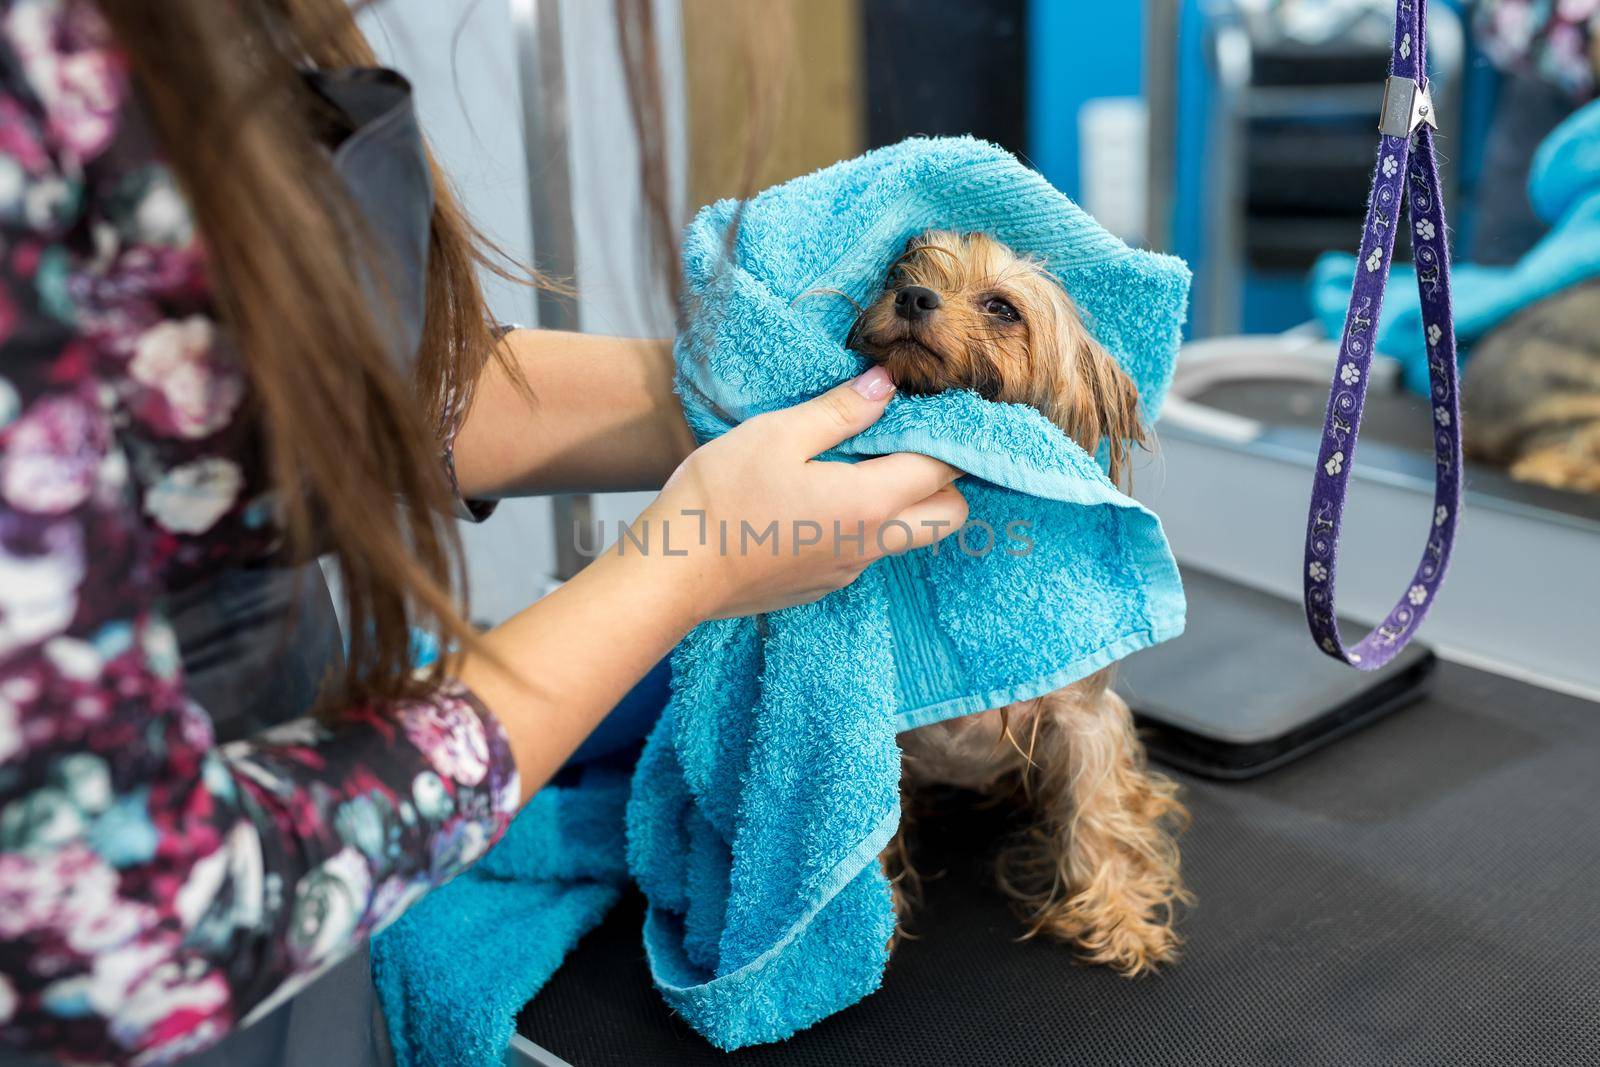 Close-up of a wet Yorkshire terrier wrapped in a blue towel on a table at a veterinary clinic. Care and care of dogs. A small dog was washed before shearing, she's cold and shivering. by StudioPeace